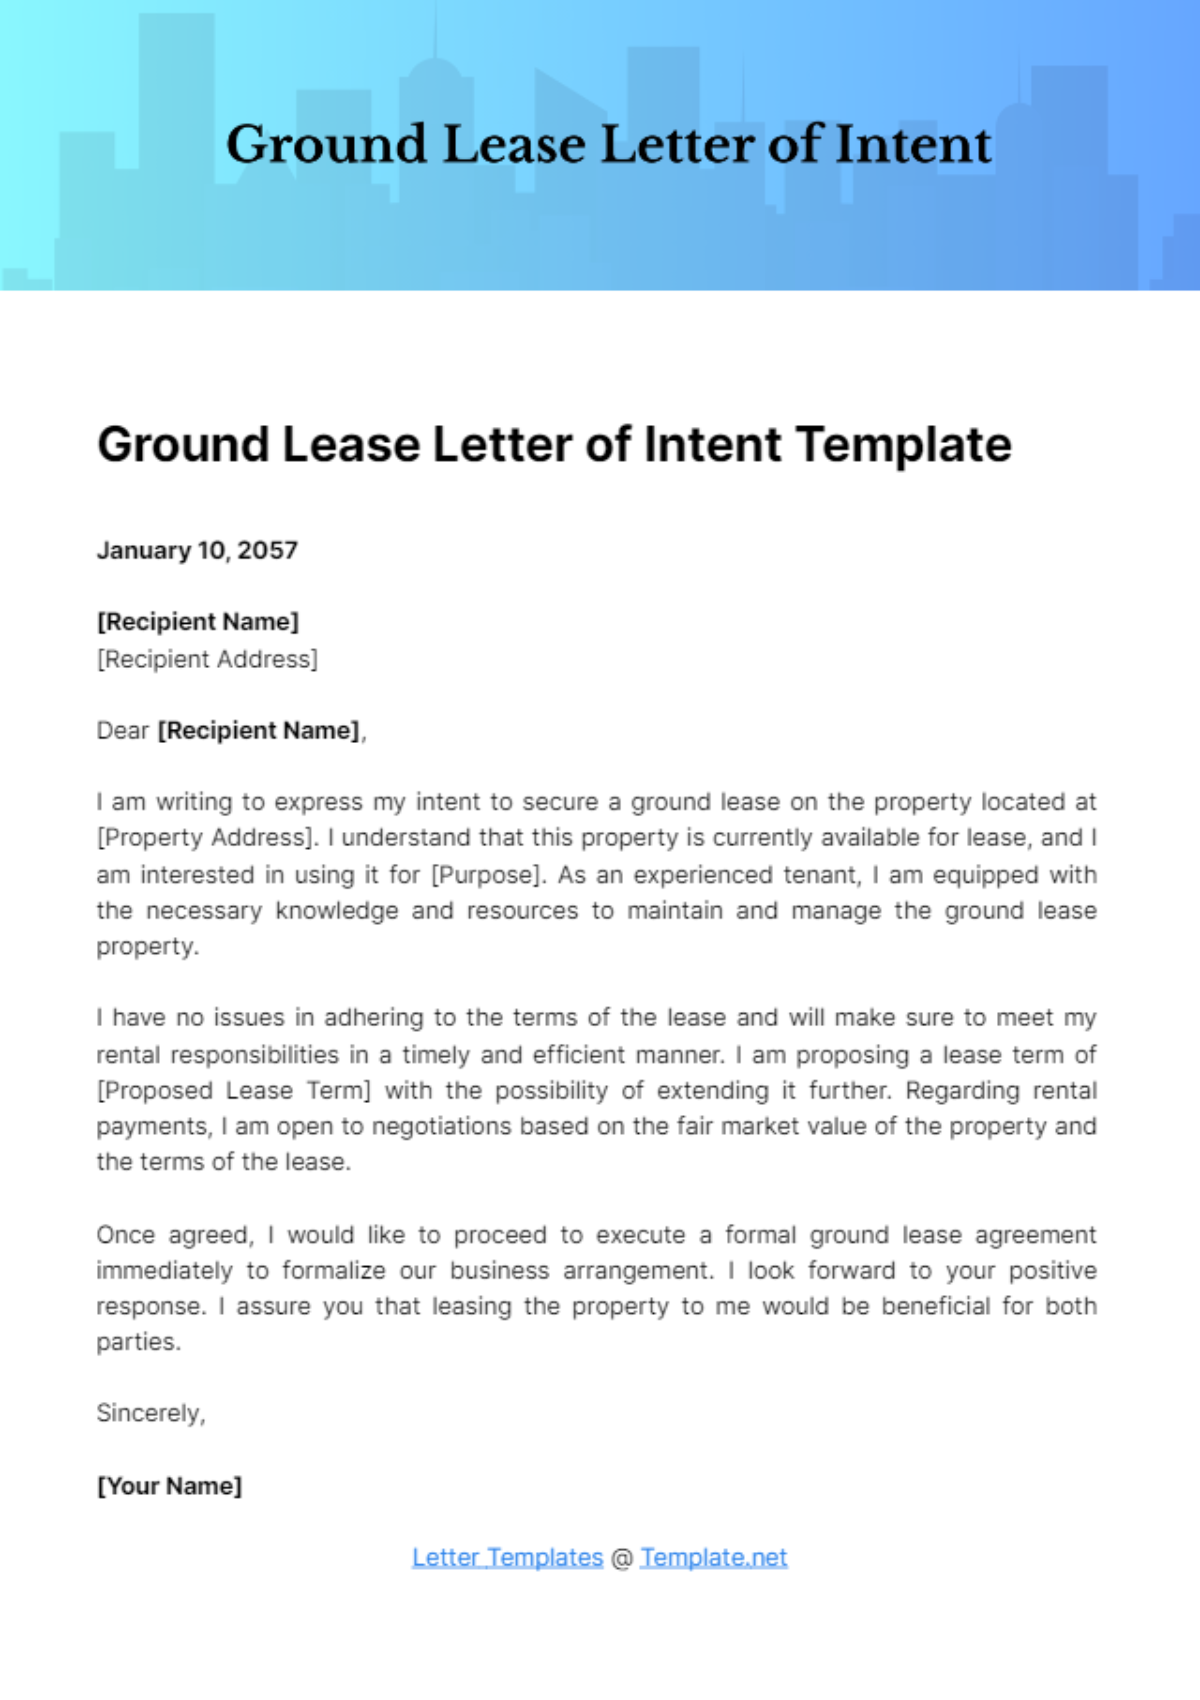 Free Ground Lease Letter of Intent Template